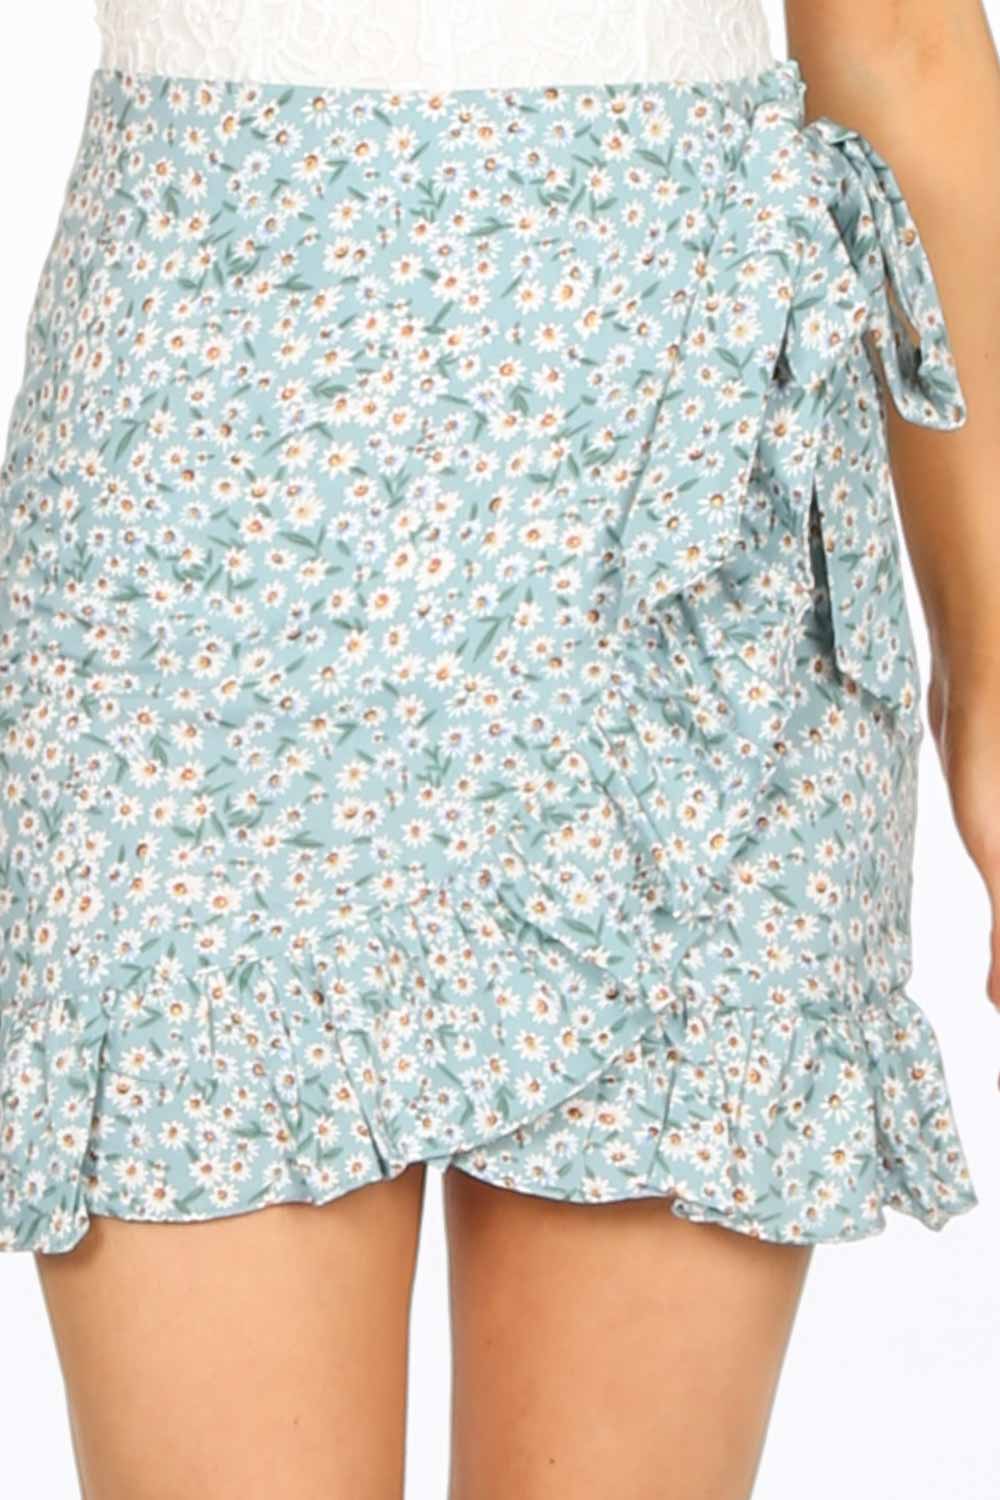 Turquoise Floral Frill Mini Skirt